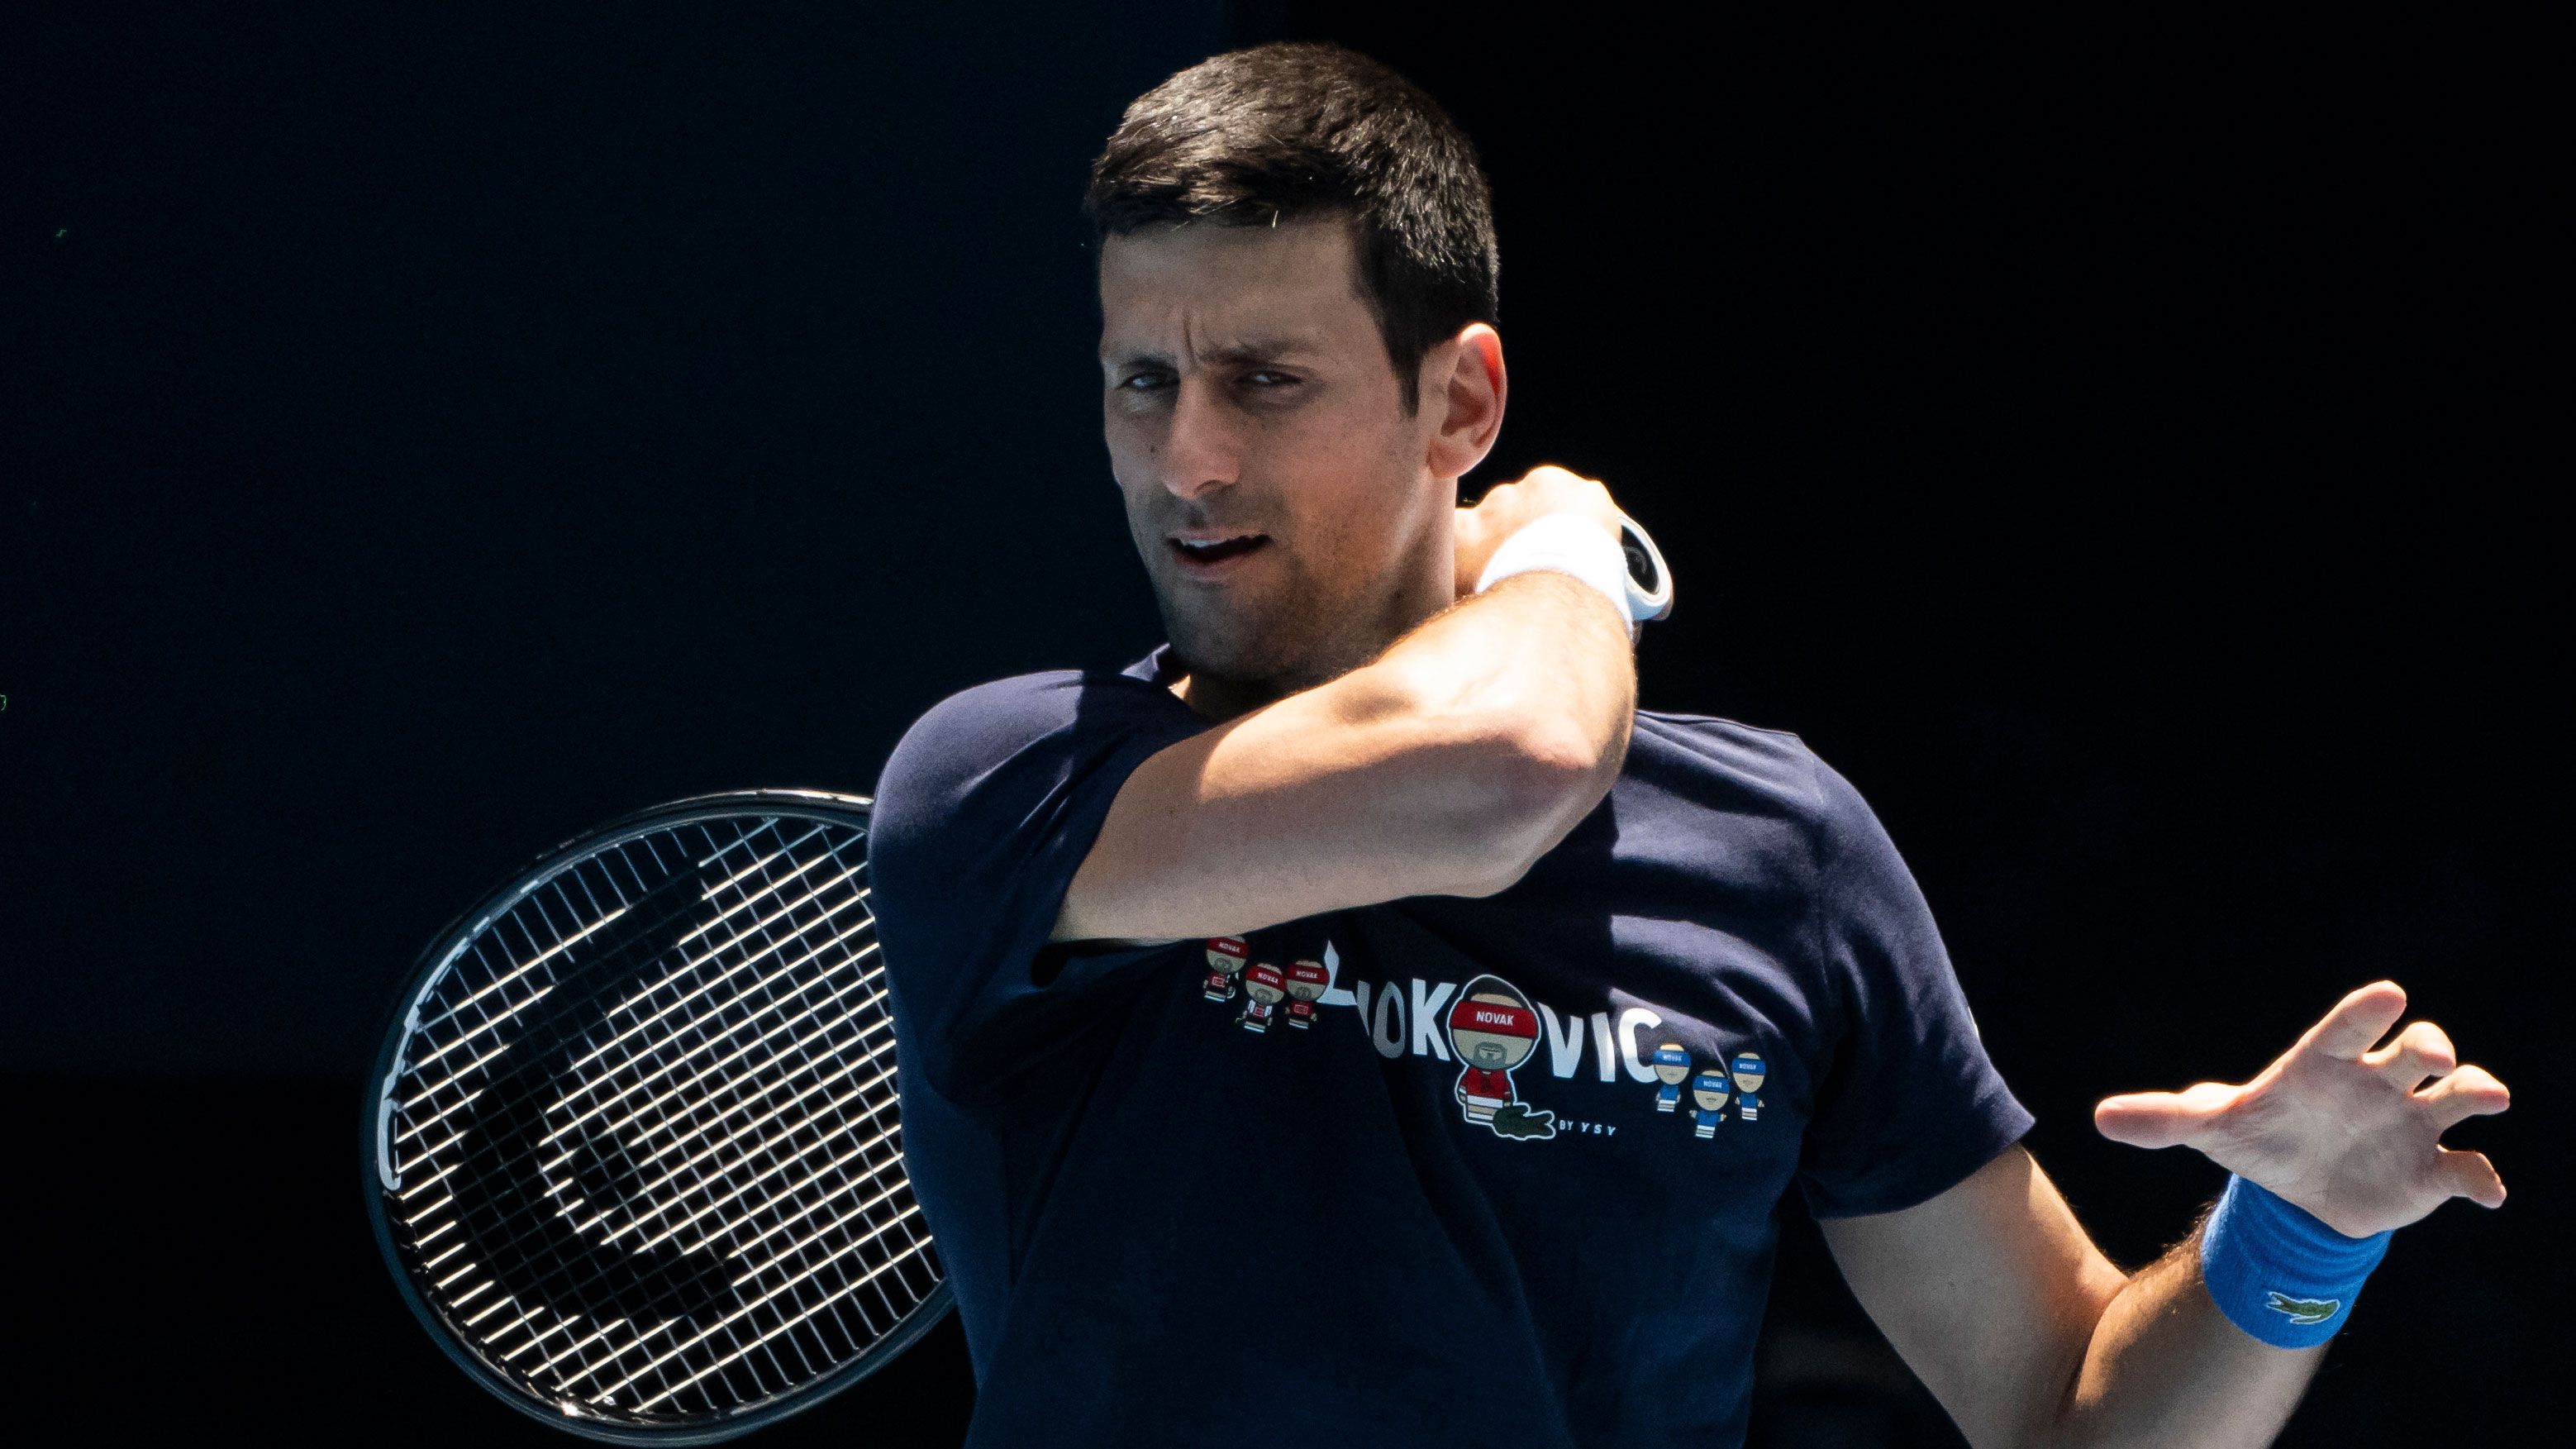 Novak Djokovic hits a forehand during a practice session ahead of the 2022 Australian Open at Melbourne Park.